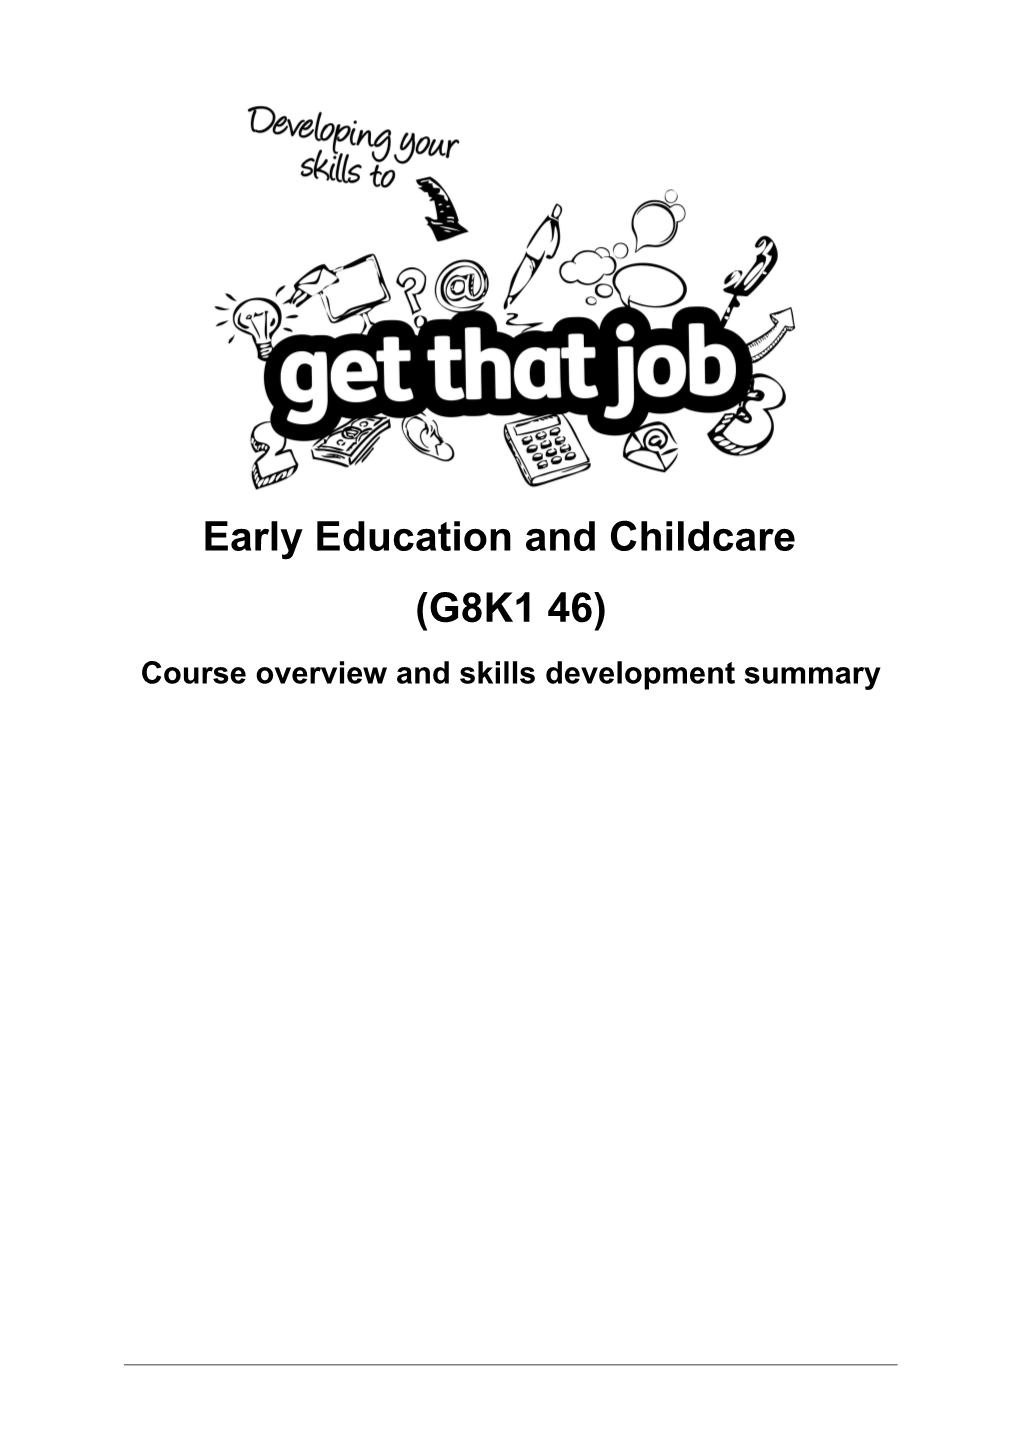 Early Education and Childcare